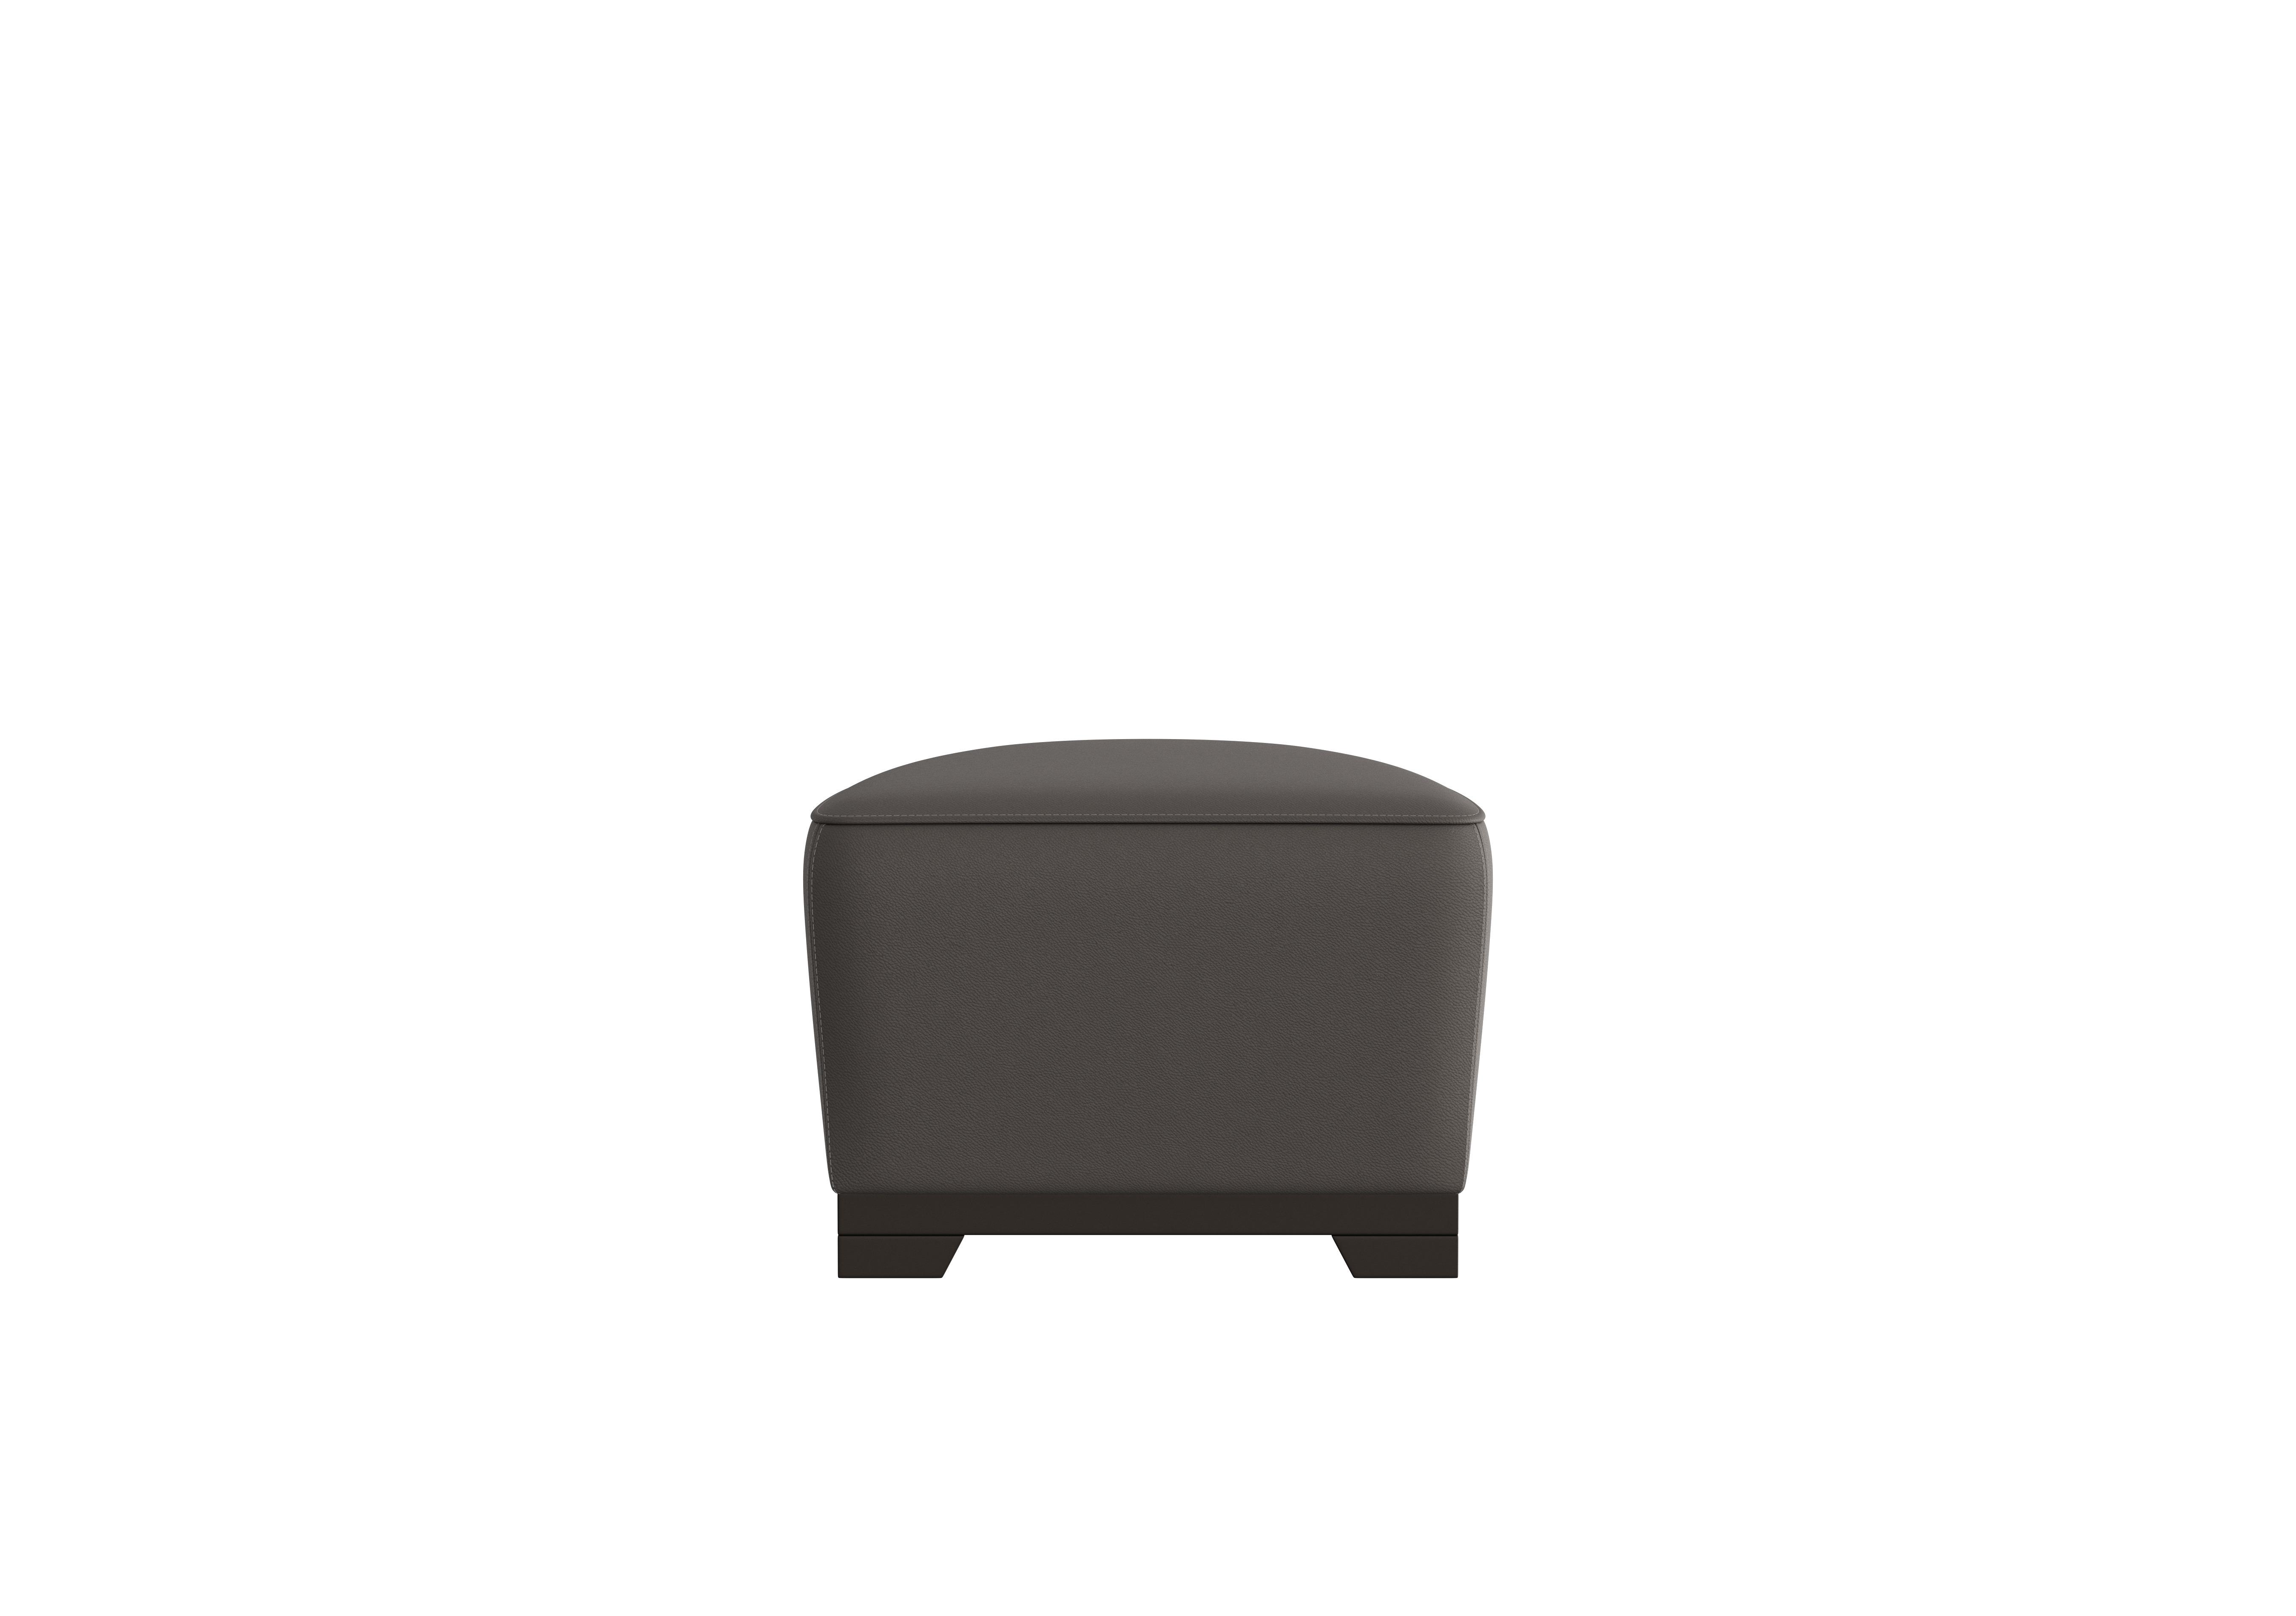 Ketty Leather D-Shaped Footstool in Torello Grigio Scuro 327 on Furniture Village